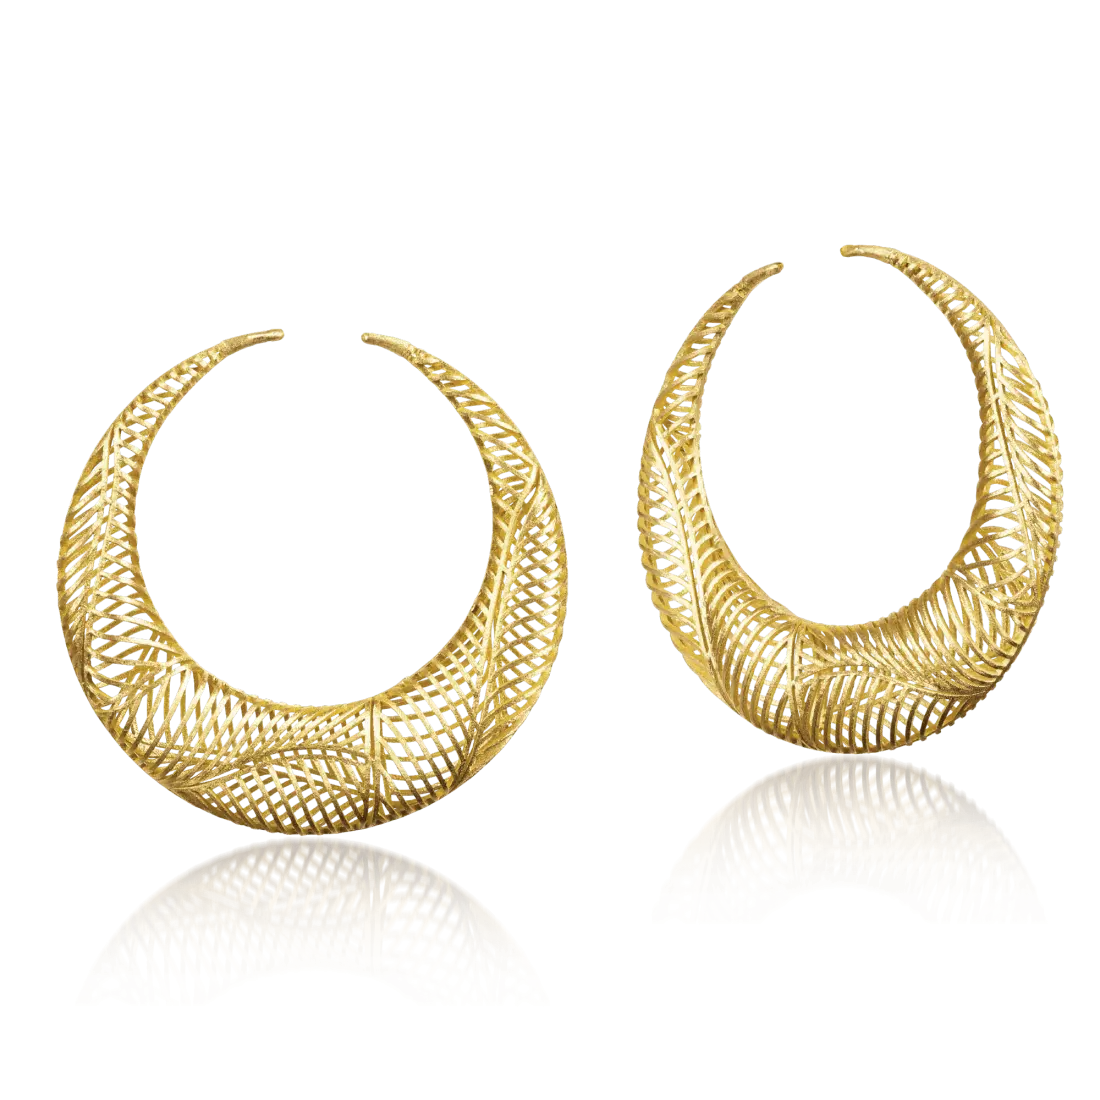 Large hoop earrings in 18k yellow gold.  Details:  Approximate diameter: 42 mm. Approximate thickness: 6.5 mm. Approx. gold weight: 14.50 g Designed by Luisa Rosas and made in Portugal